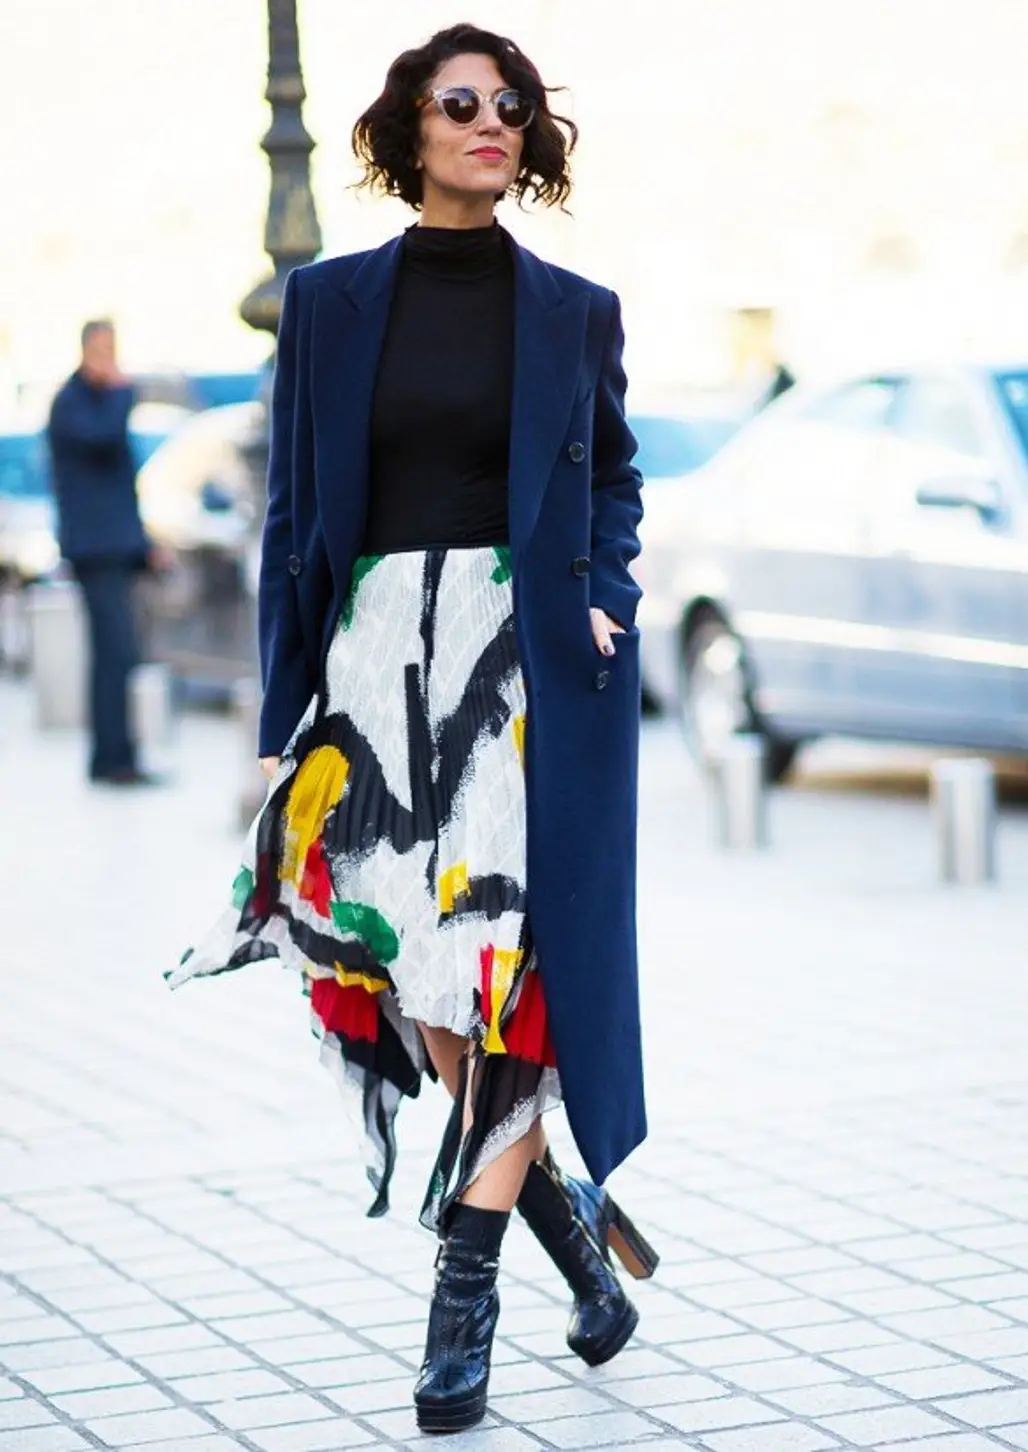 Flowy Skirt and Long Coat